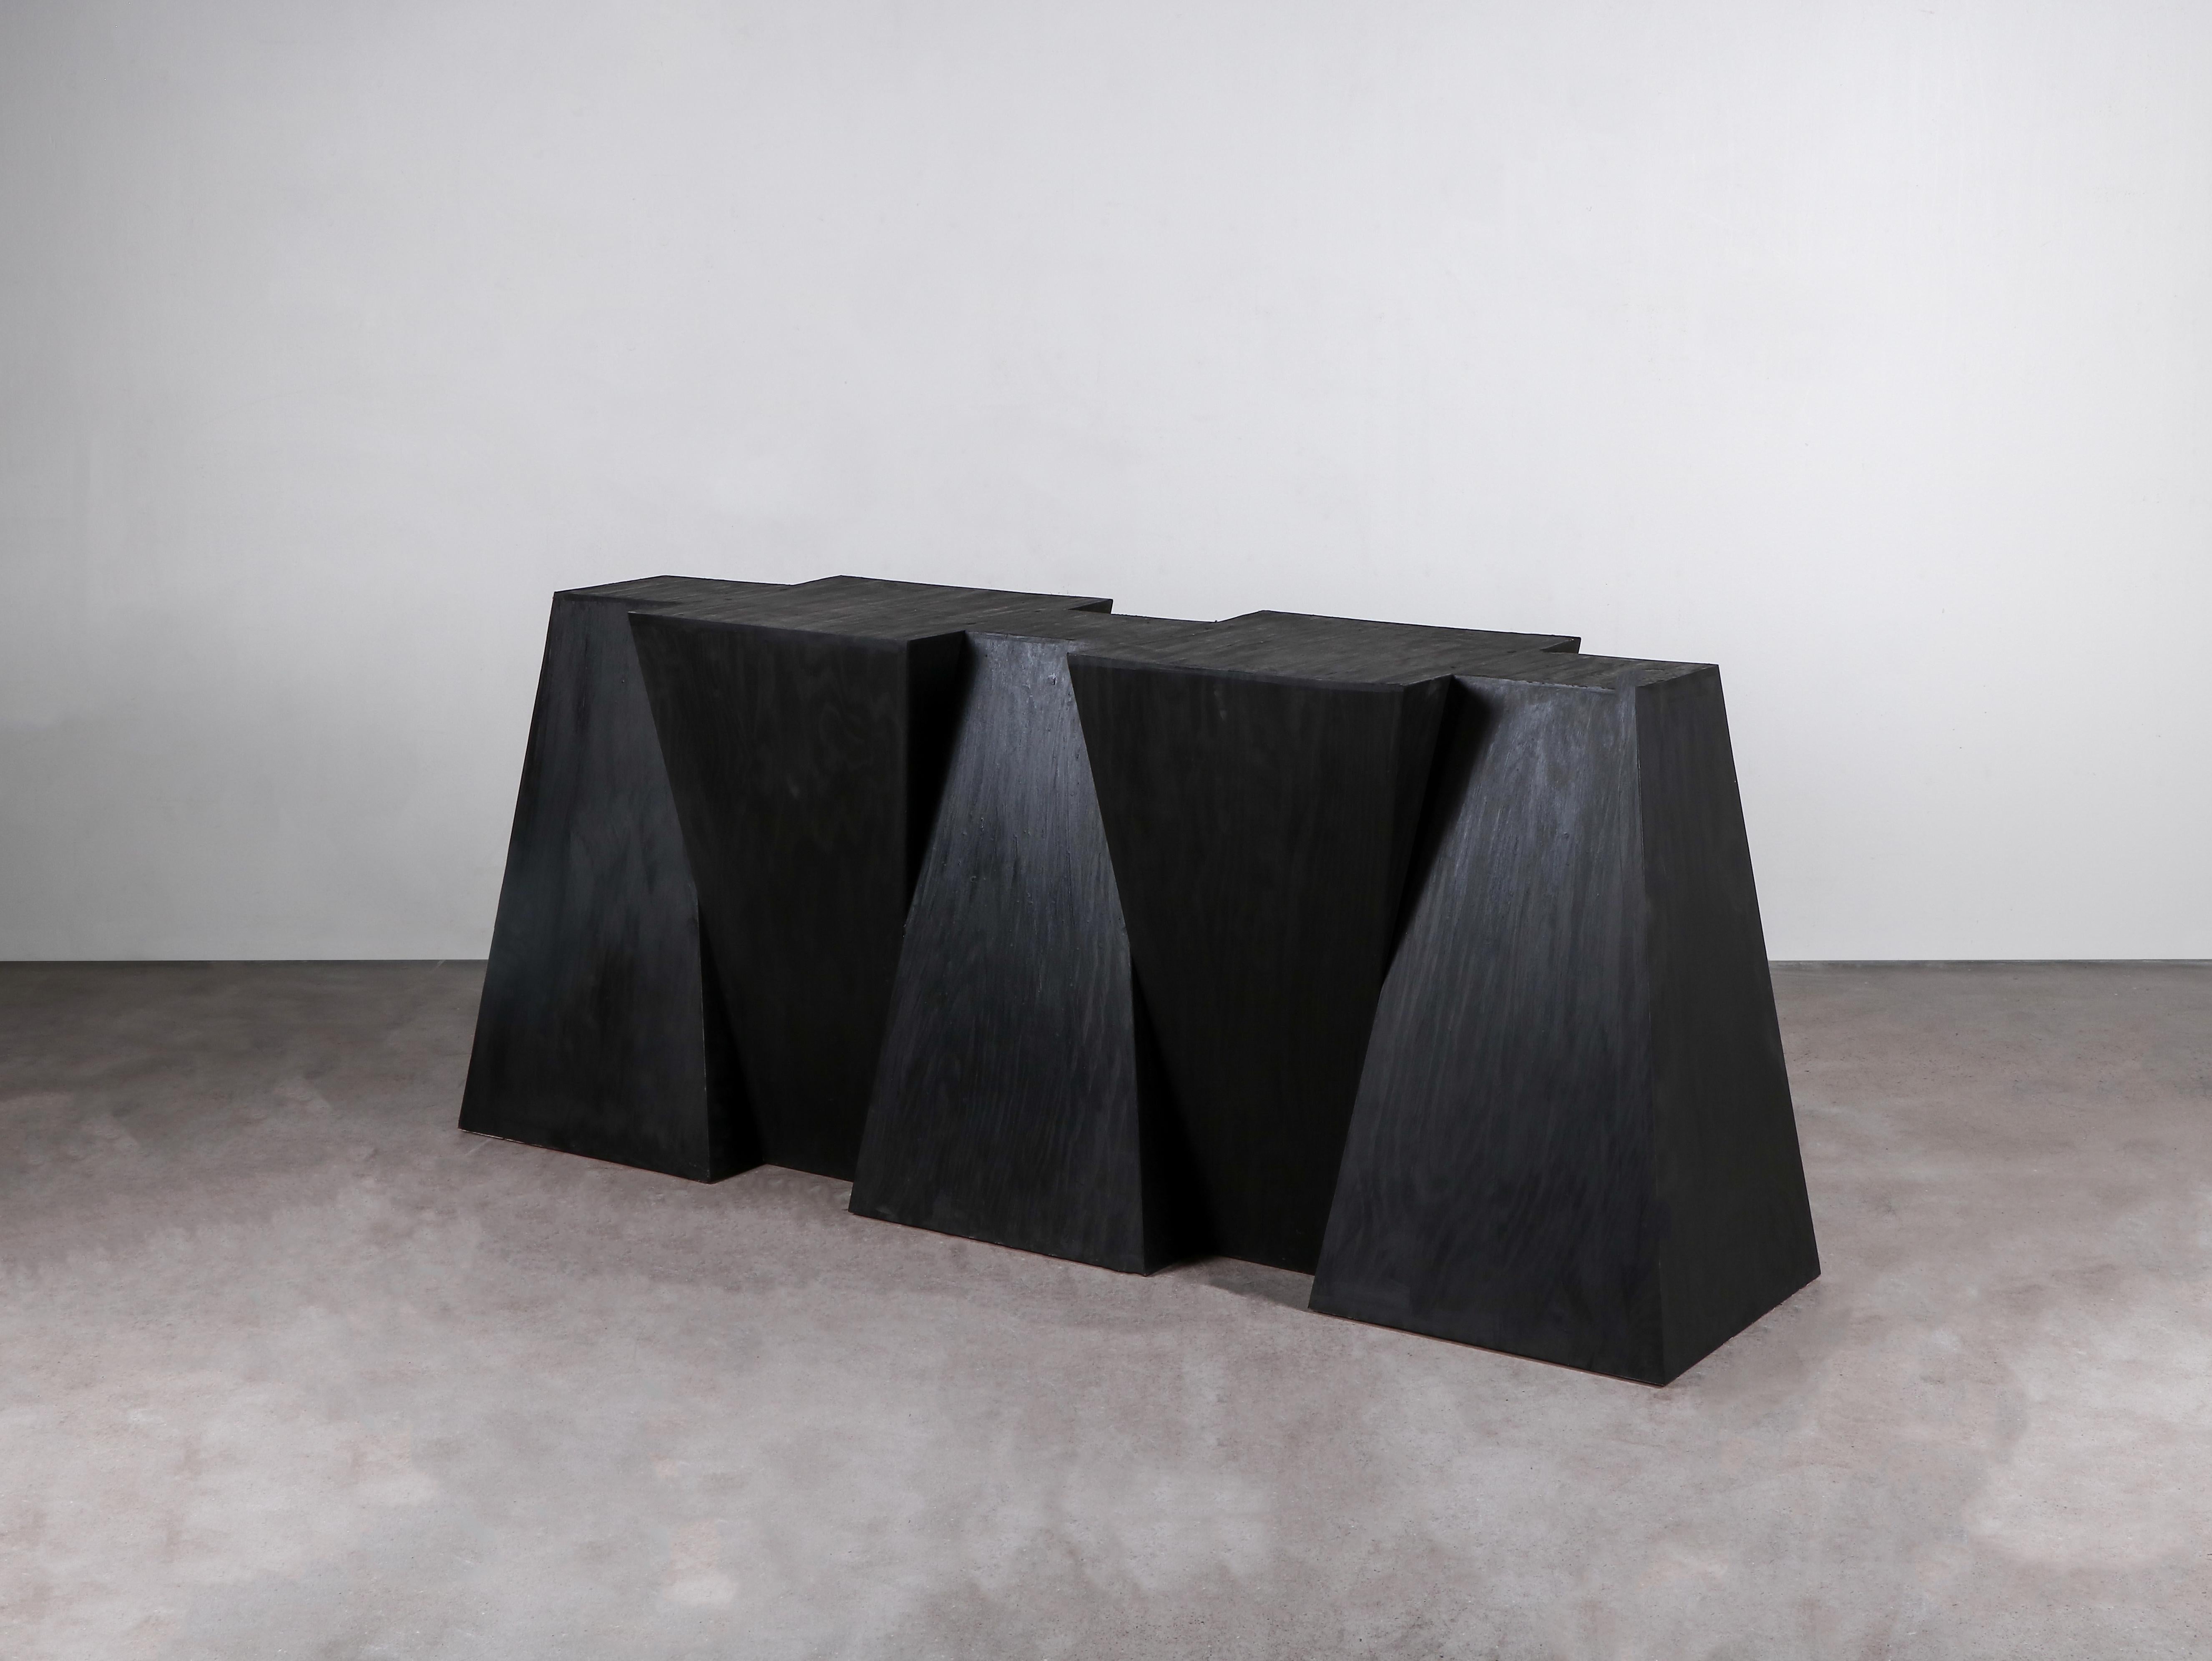 Contemporary Black Console in Hand-Waxed Plywood - Grav Console by Lucas Morten

2021
Limited edition of 11 + 1 AP
Dimensions (cm): L 160 D 40 H 67
Material: hand-waxed plywood

Objects comes with a 